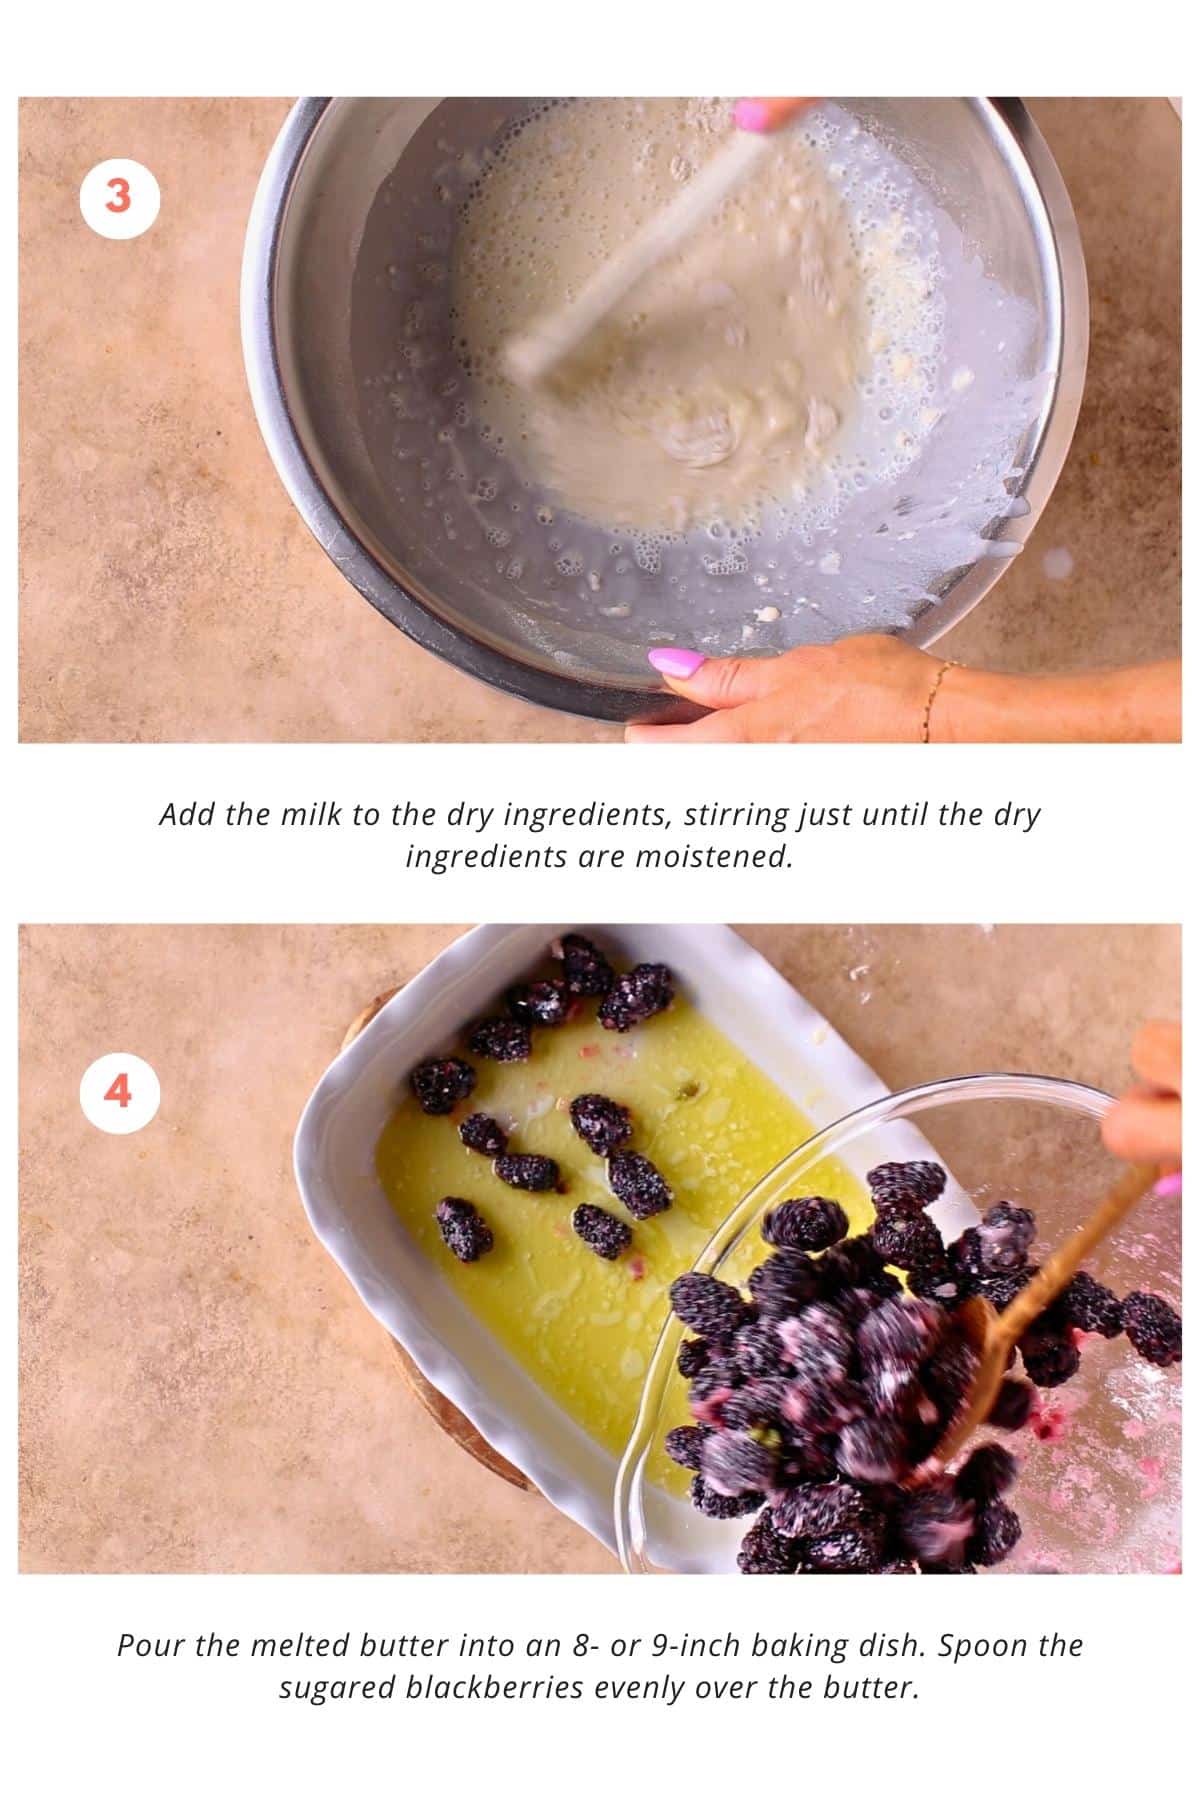 The dry ingredients are combined with milk, stirring until just moistened. Lumps are acceptable. Melted butter is poured into an 8- or 9-inch baking dish, and sugared blackberries are evenly spooned over the butter.